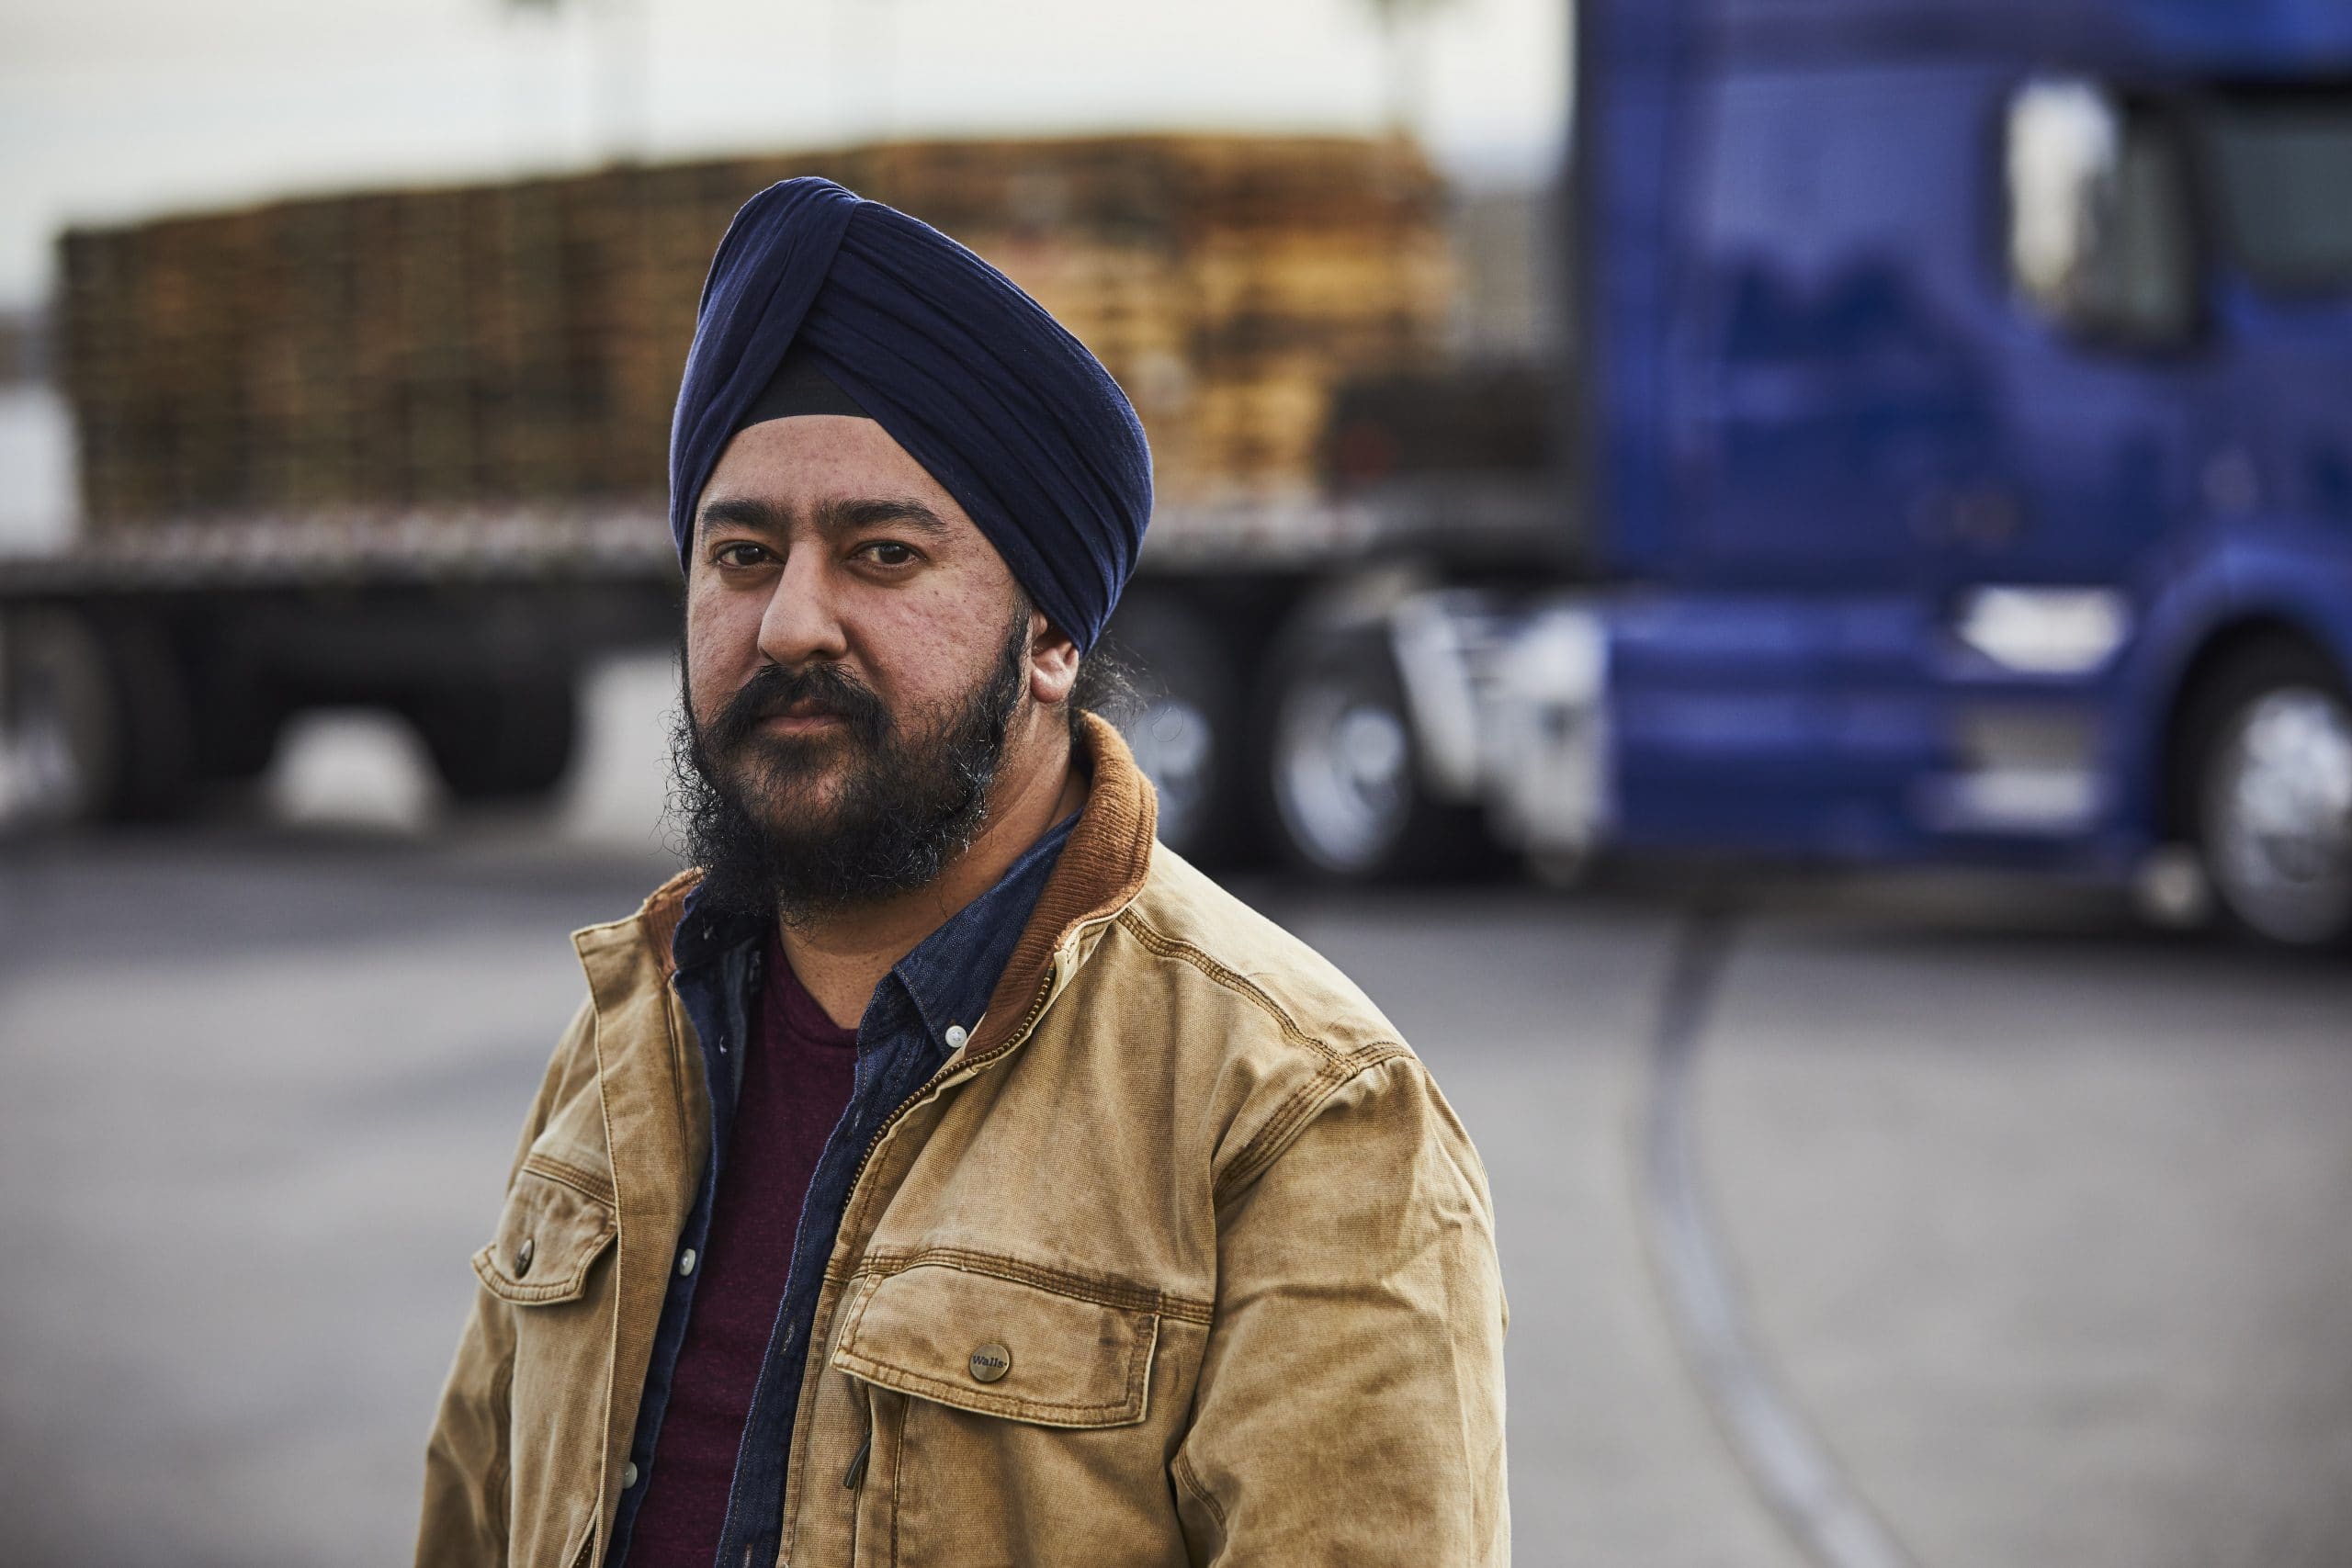 Sikh fleet owner on finding a foothold in trucking